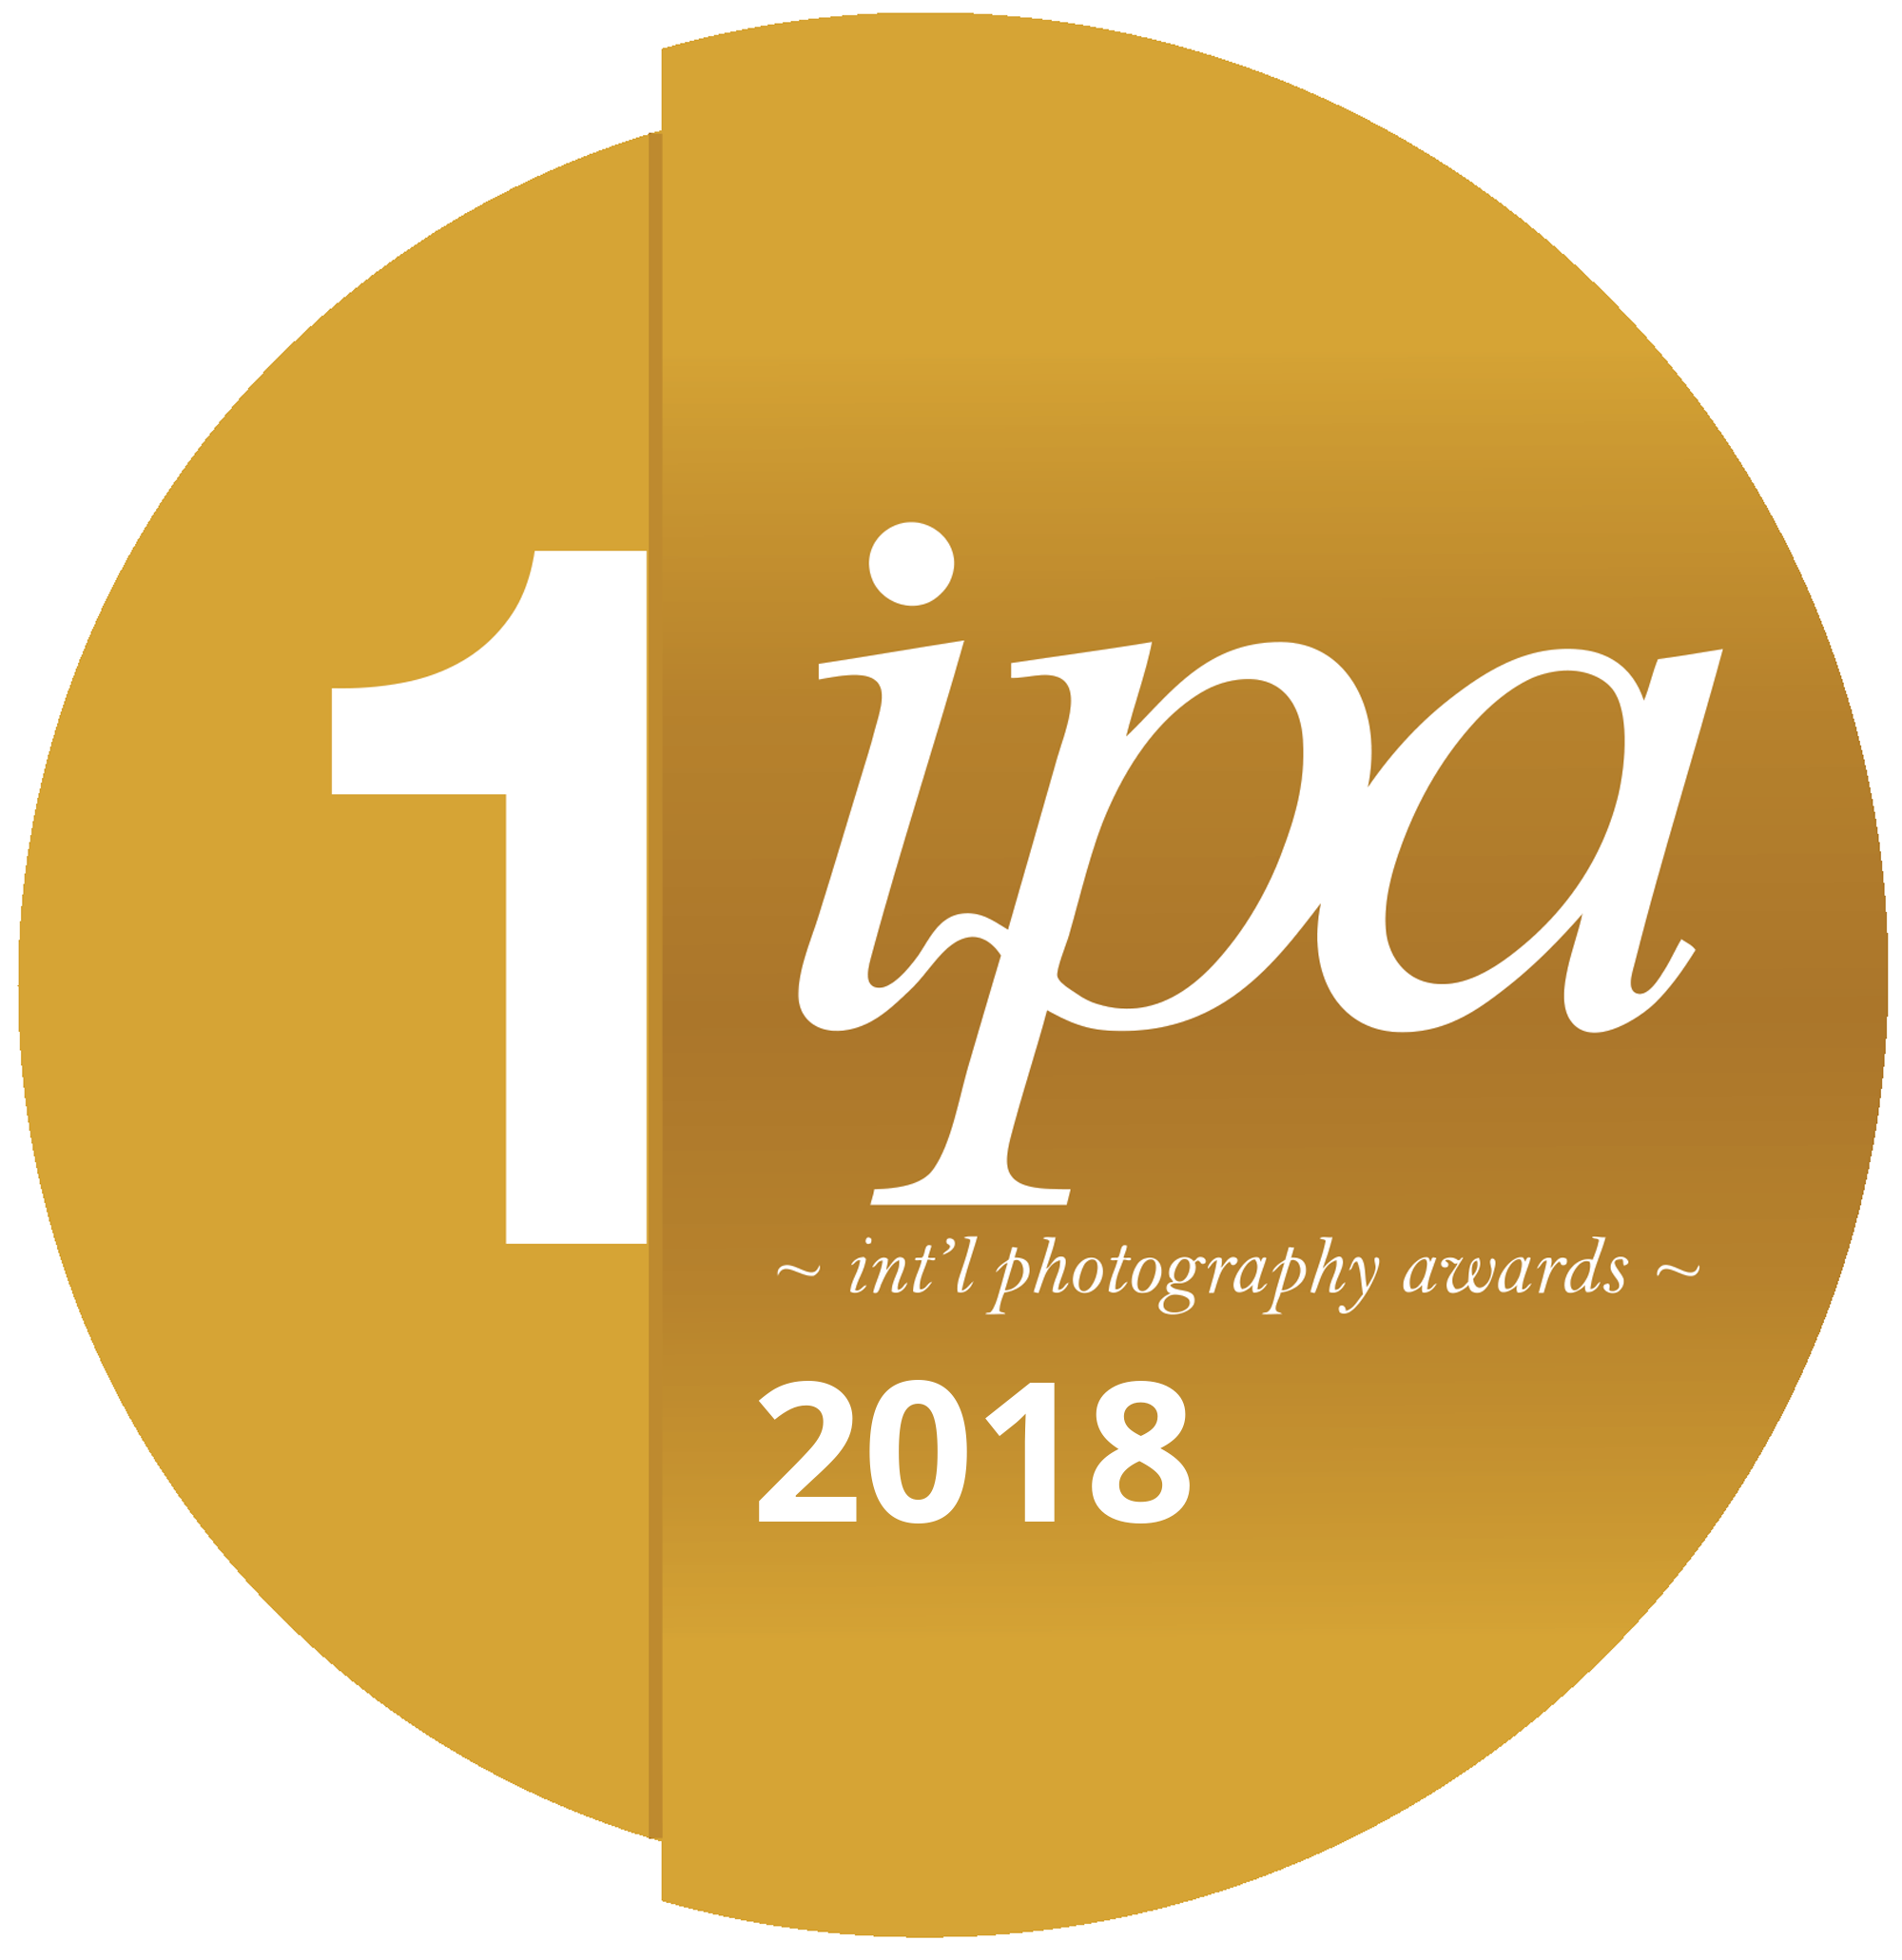 WINNER OF IPA 2018, International Photography Awards Los Angeles 

Harald Weimann of Germany was awarded: First Place in category Fine Art, Landscape for the entry entitled, 